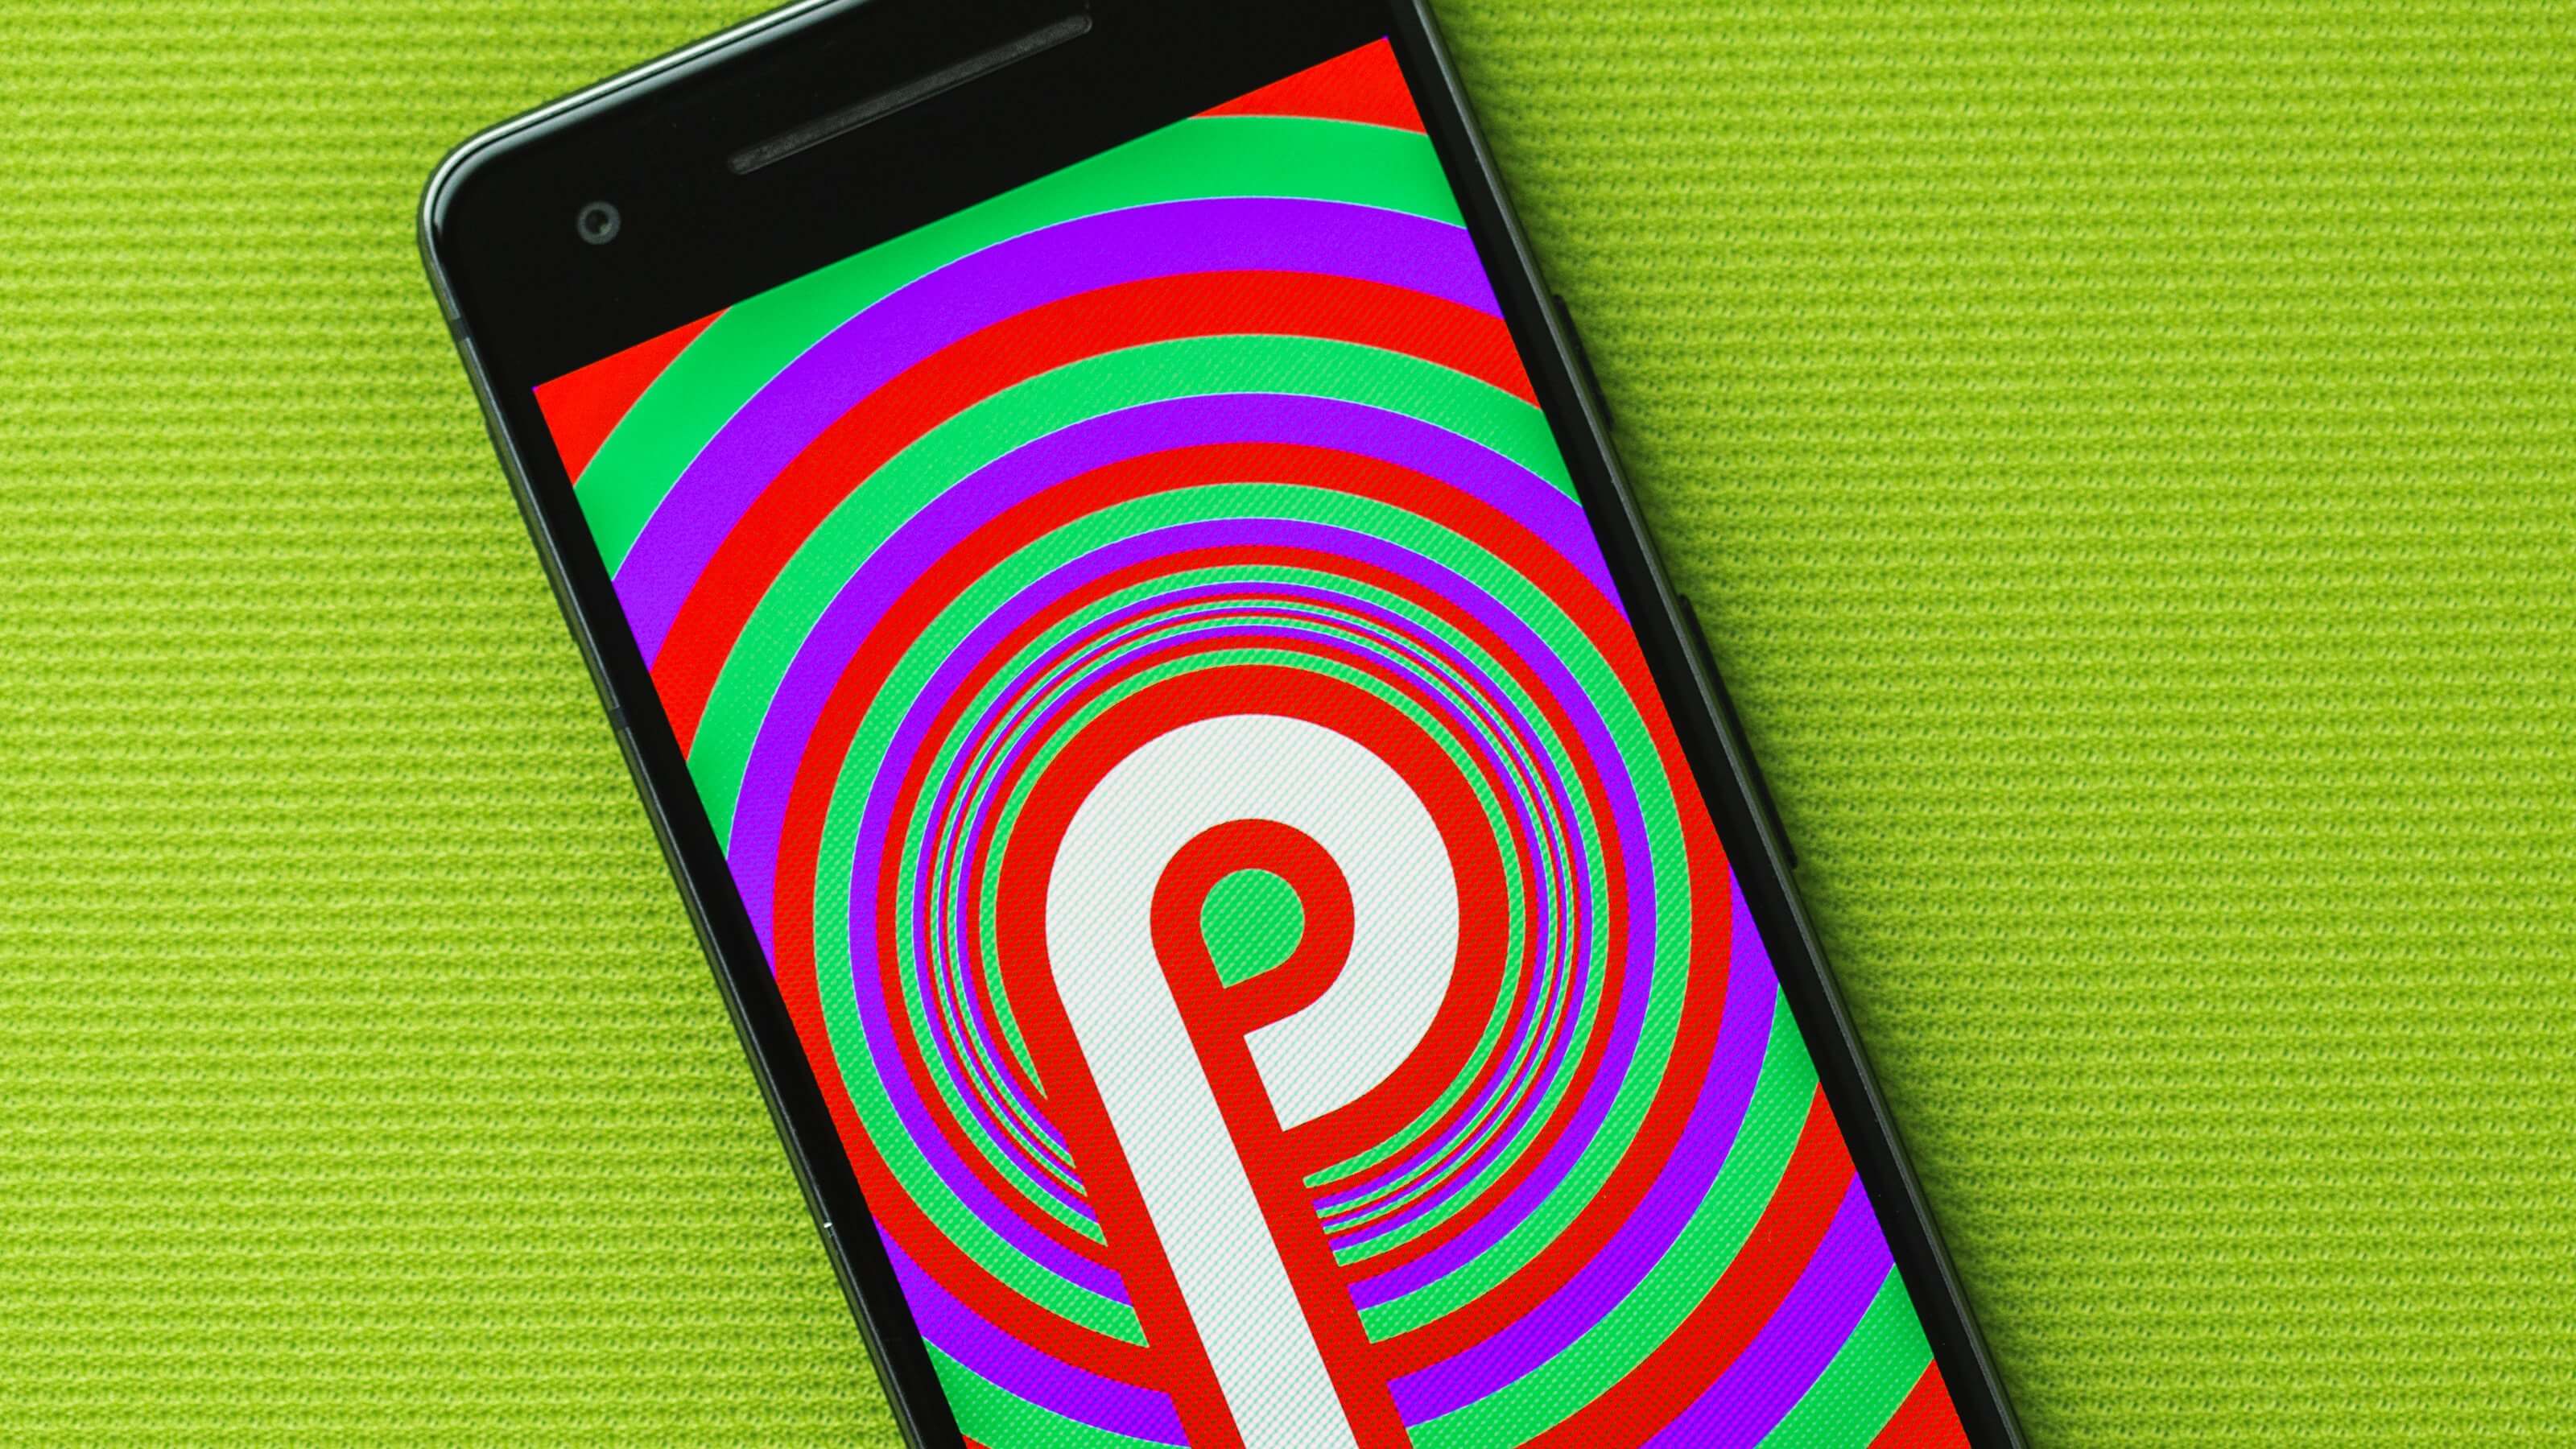 Android P Developer Preview 3 Almost Ready, Coming Soon For Some Eligible Devices